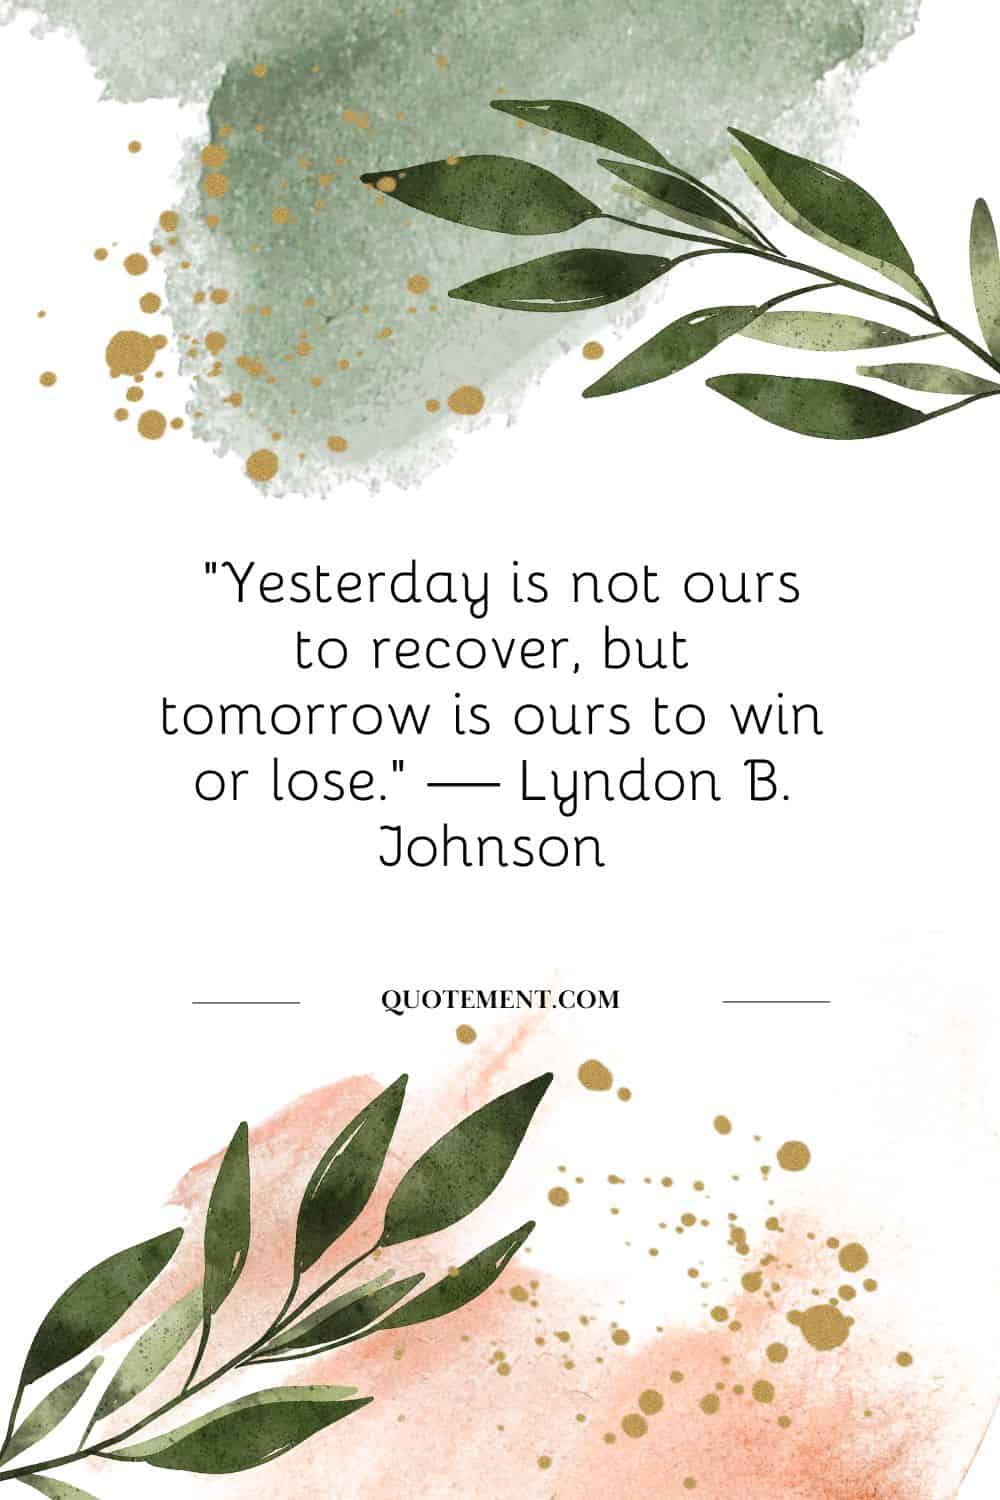 “Yesterday is not ours to recover, but tomorrow is ours to win or lose.” — Lyndon B. Johnson